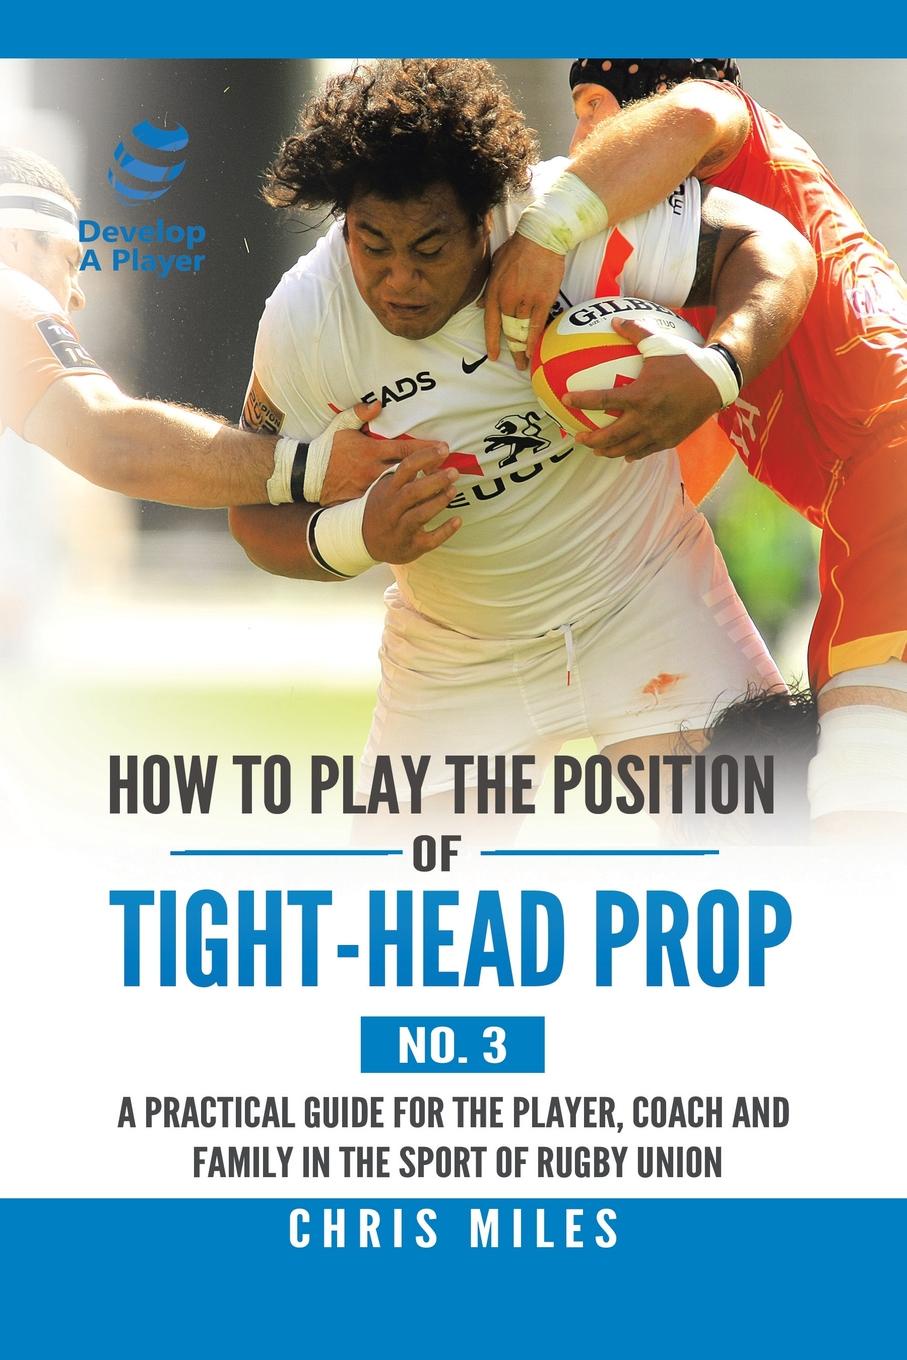 How to Play the Position of Tight-Head Prop (No. 3). A Practical Guide for the Player, Coach, and Family in the Sport of Rugby Union